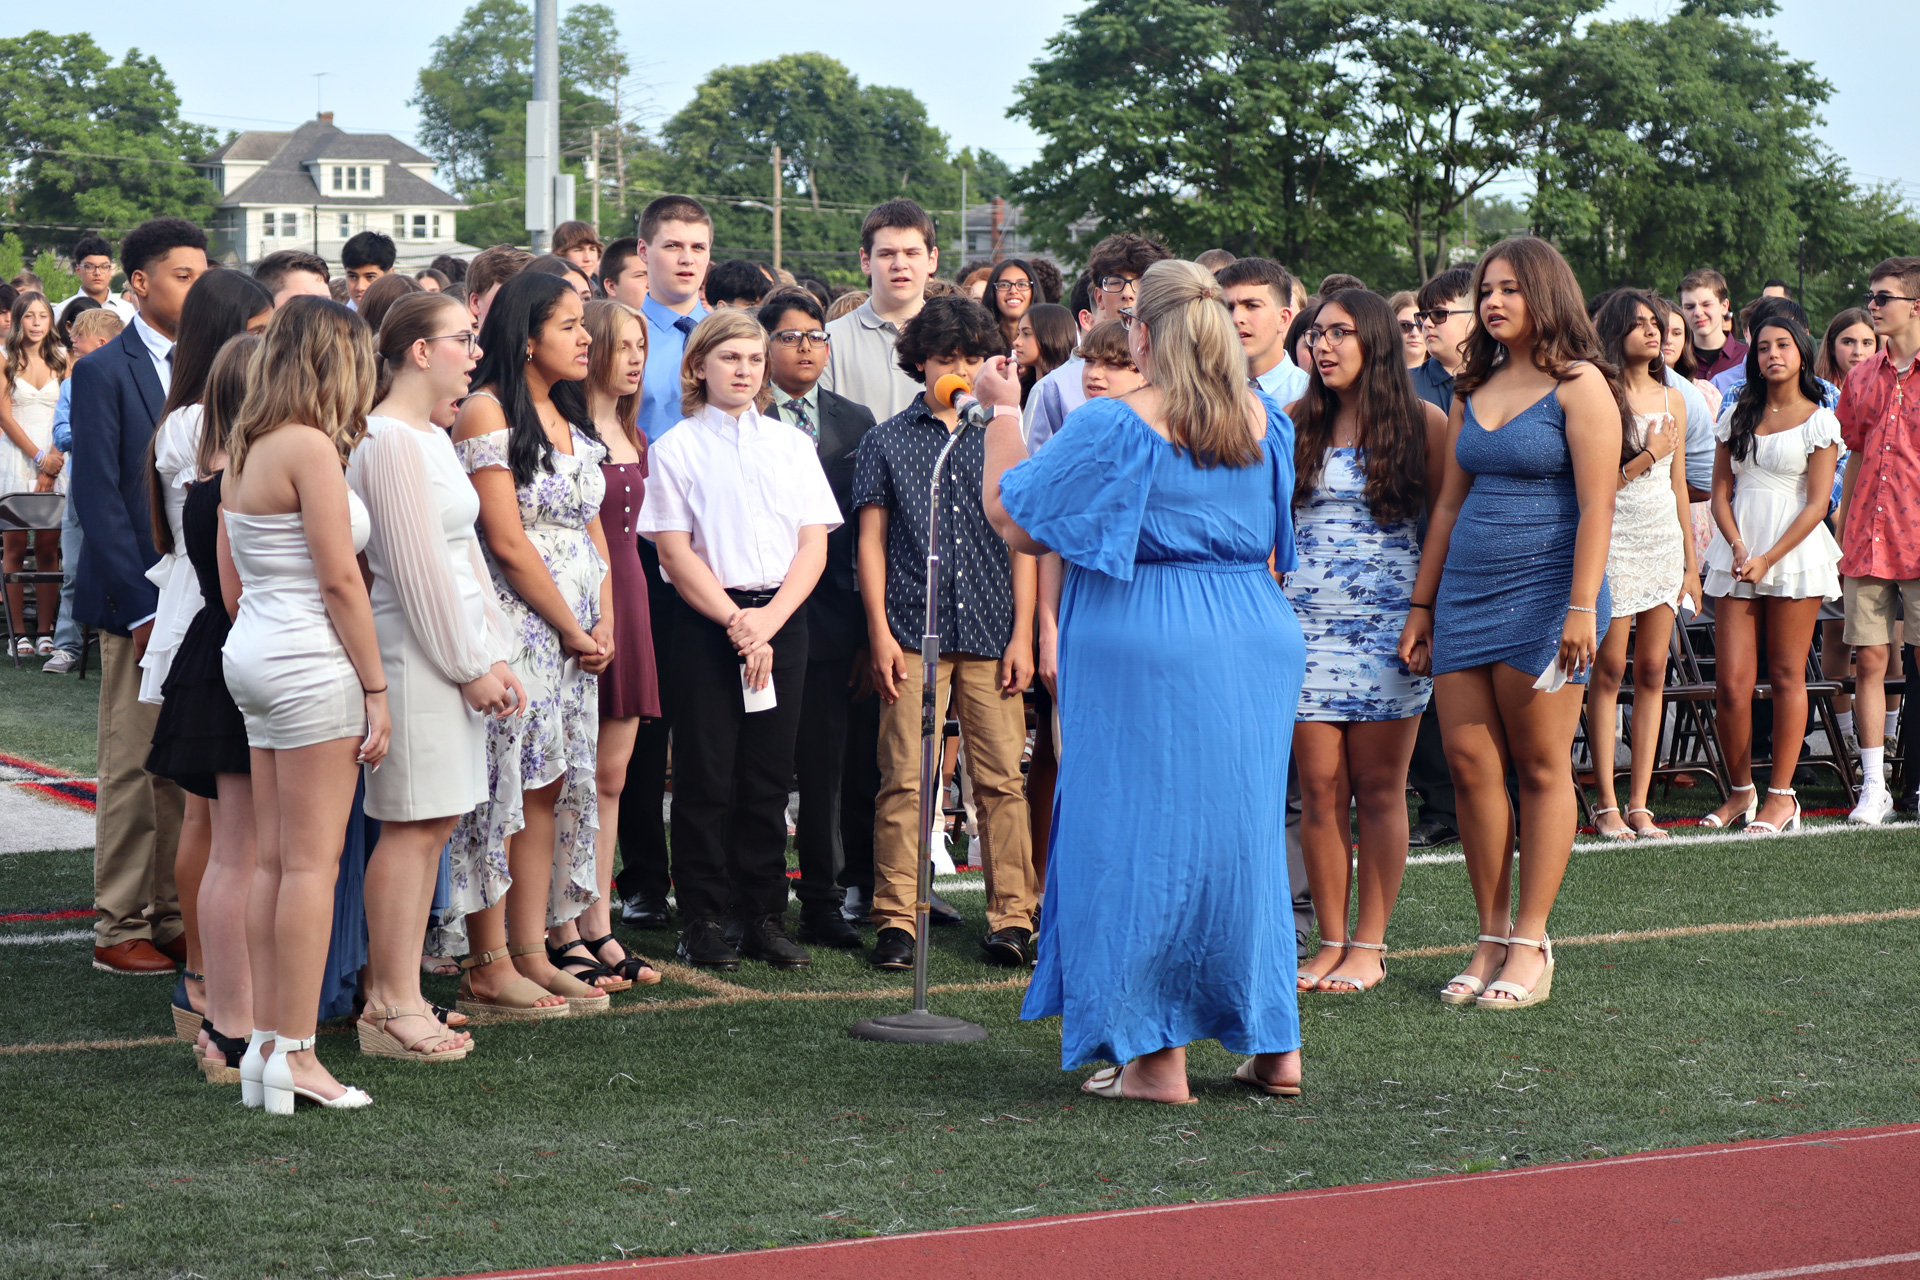 Members of the eighth grade chorus sang the national anthem.